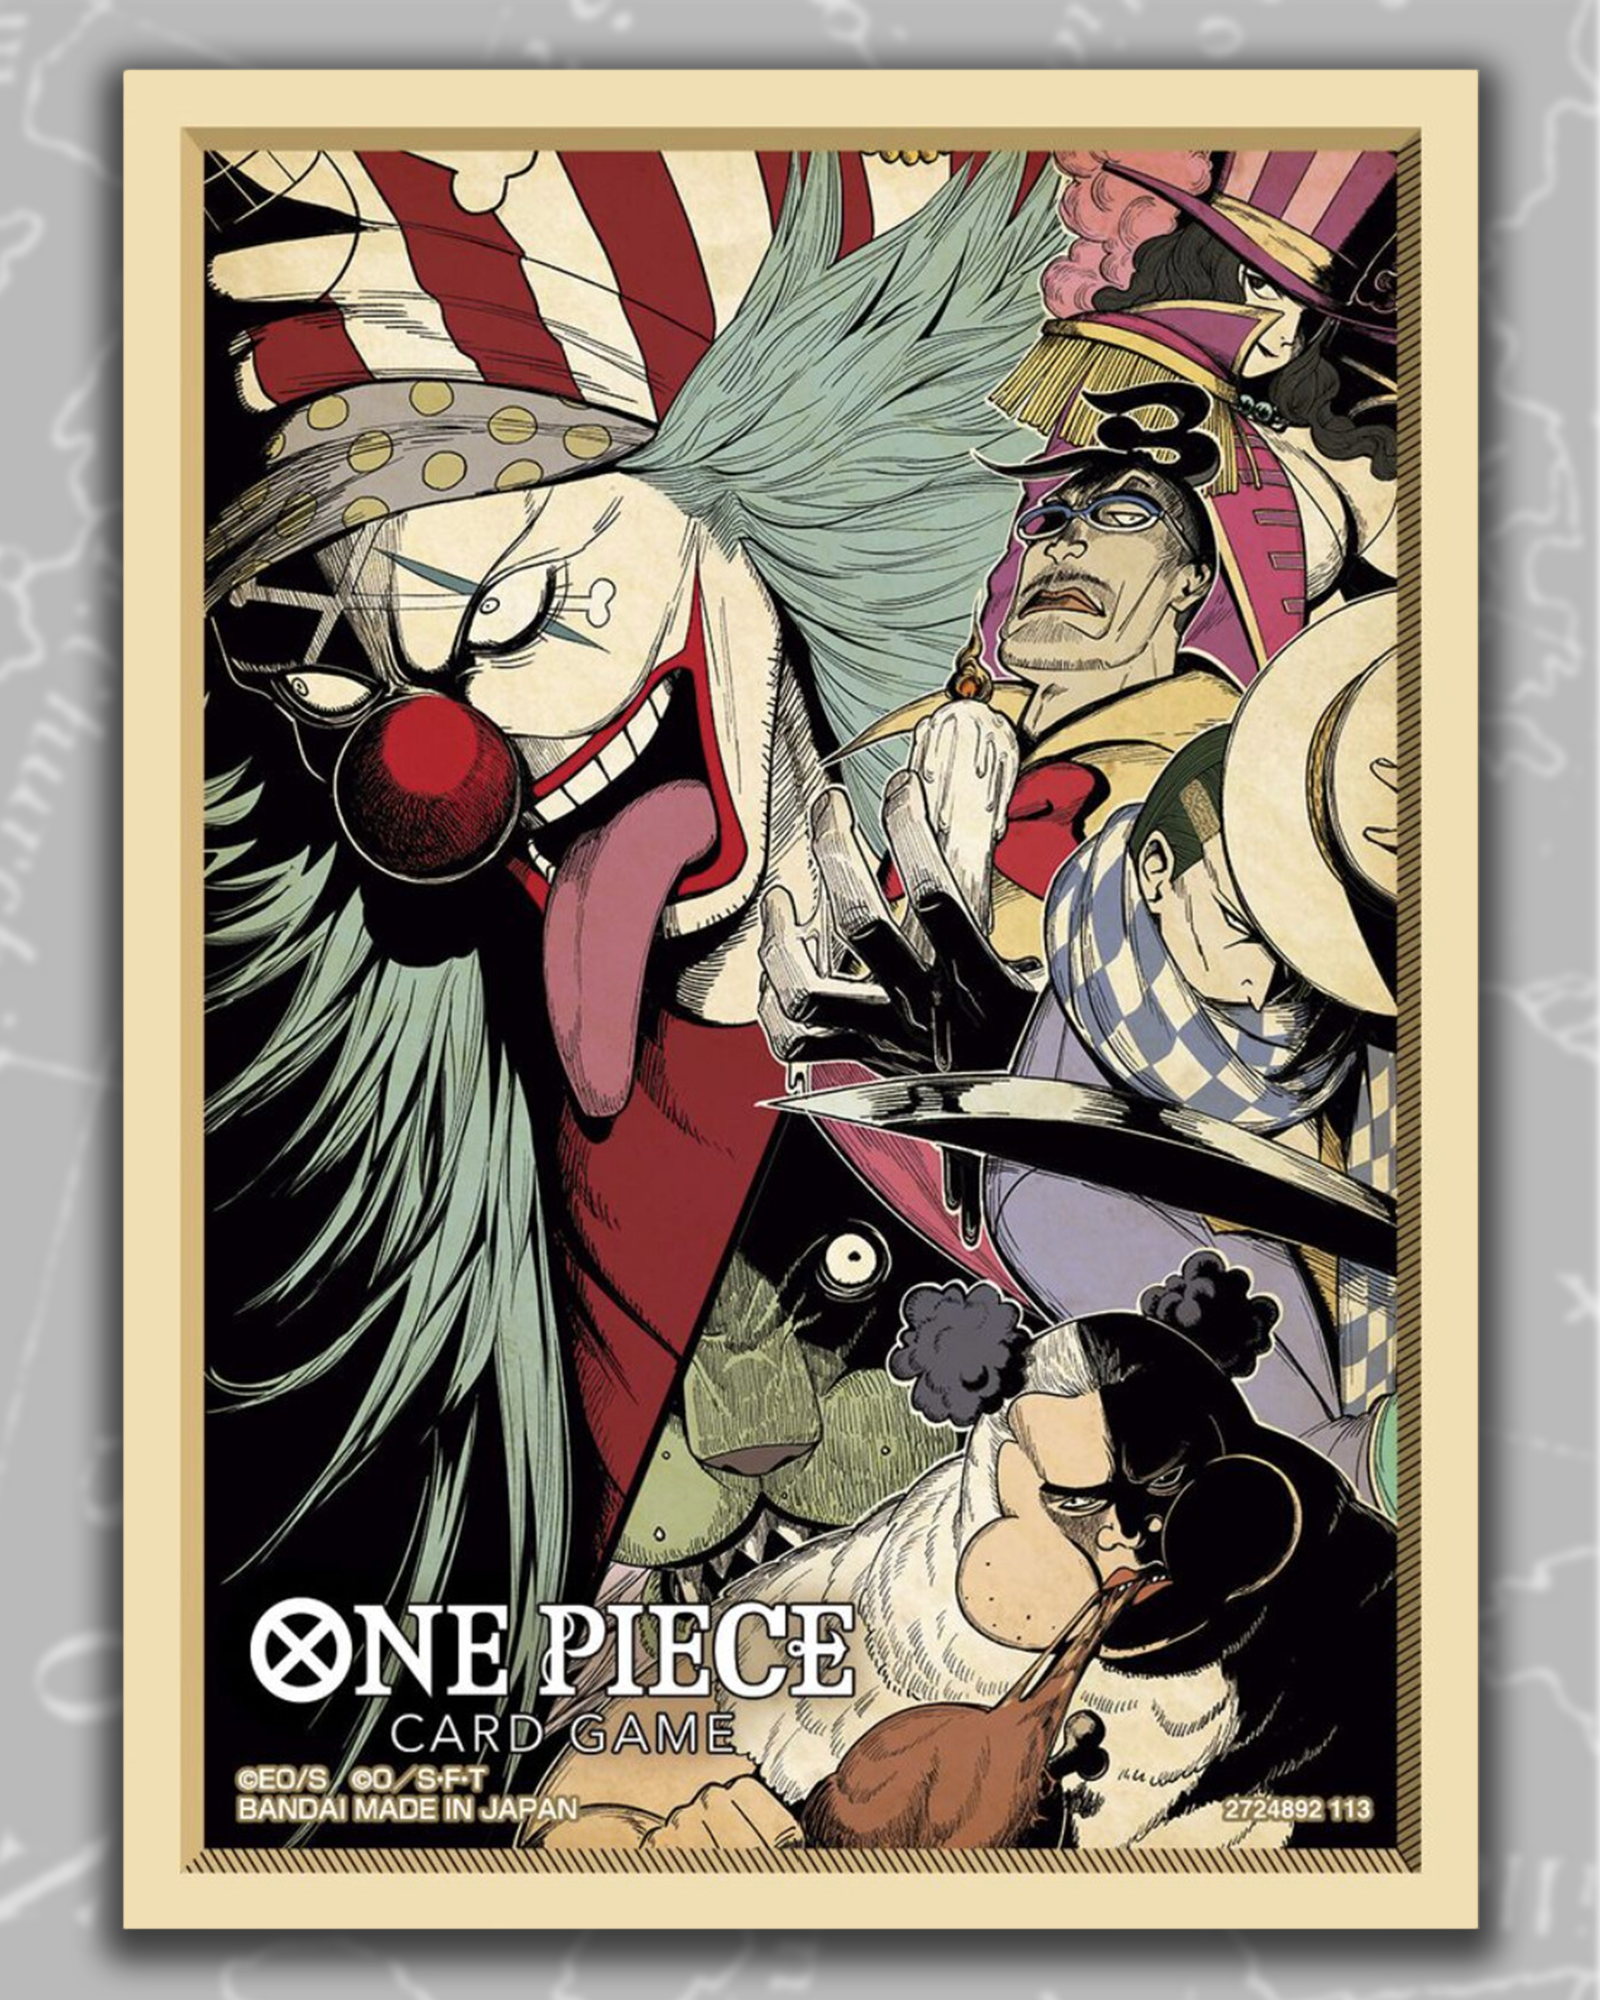 BANDAI ONE PIECE CARD GAME - OFFICIAL CARD SLEEVE LIMITED EDITION 4 Pcs SET